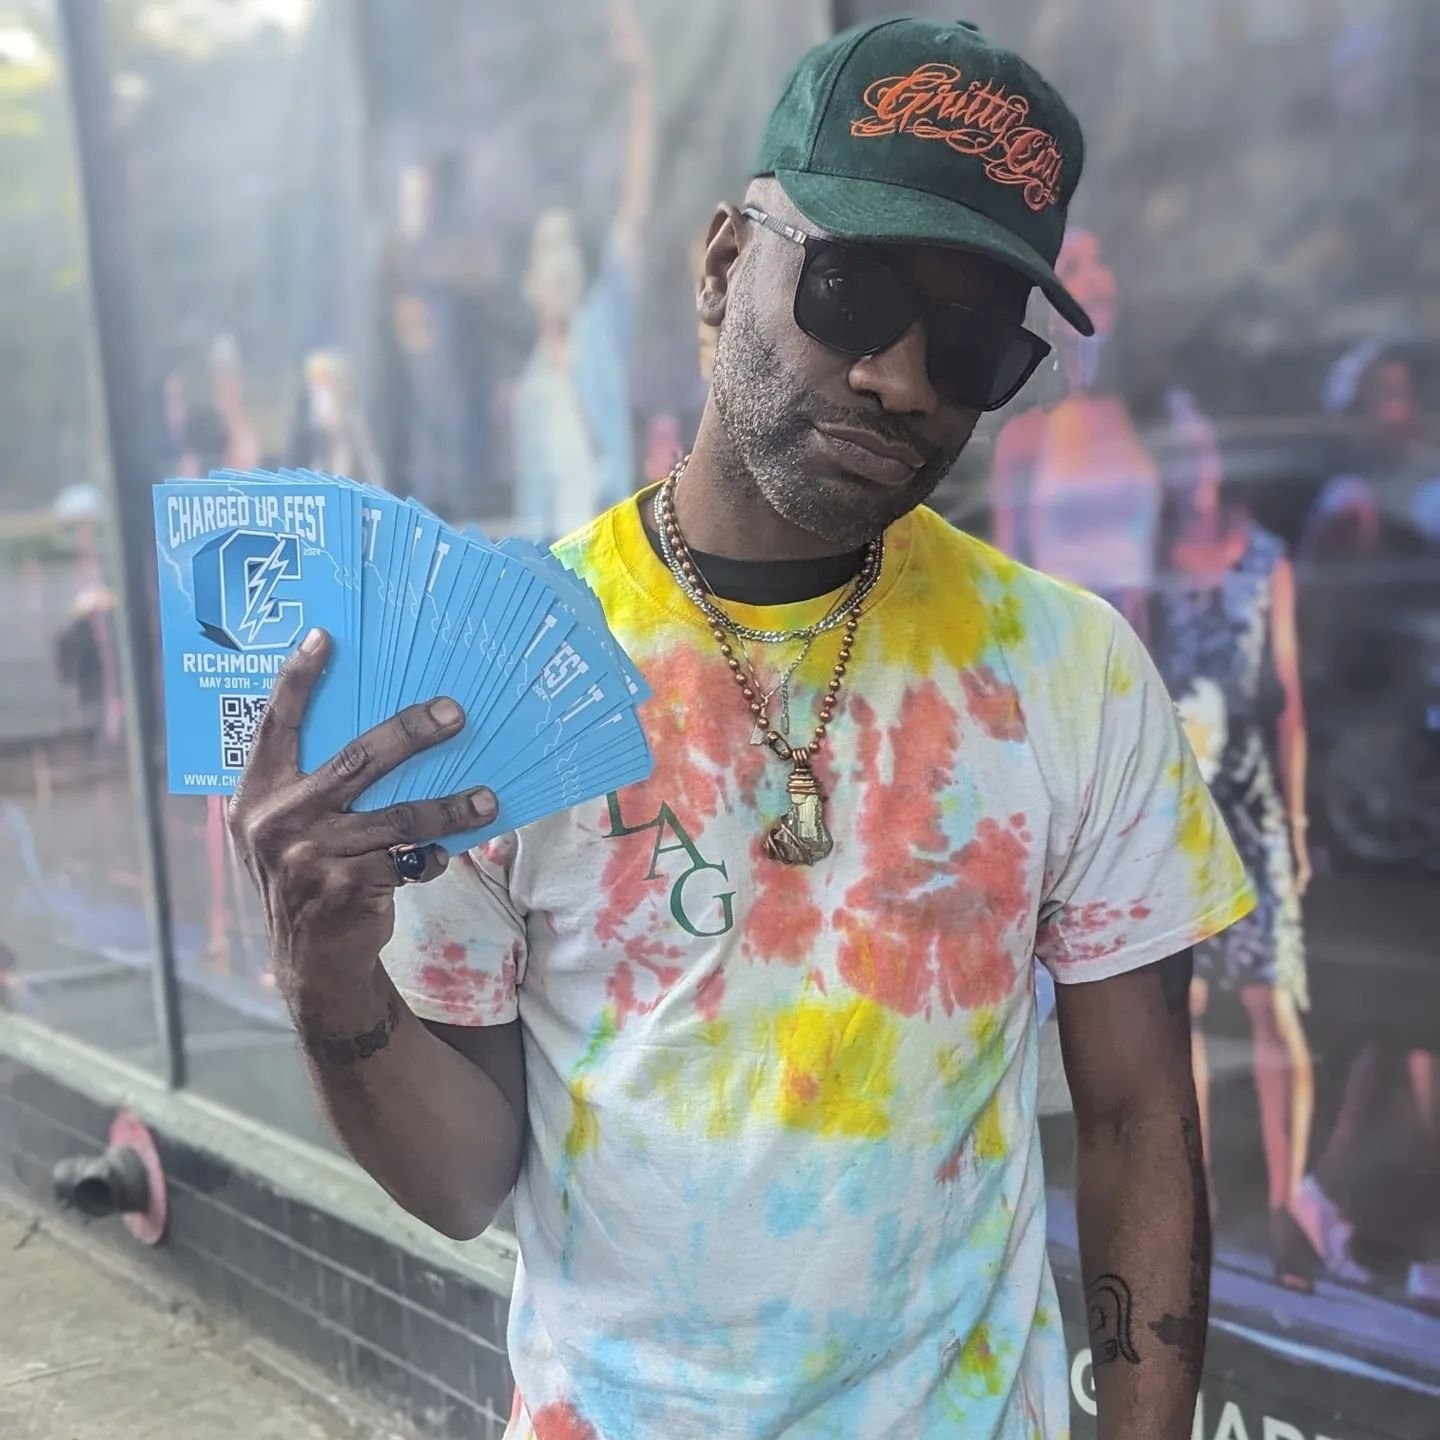 Richmond artist Ndefru spreading the word 
@chargedupfest is Coming!
5/30-6/2/24
Richmond, VA

Visit www.ChargedUpEnt.com for tickets &amp; info
#chargedupent #chargedupmerch #chargedup #rvaartsdistrict #rvasmallbusiness #richmond #VA #Streetwear #fa